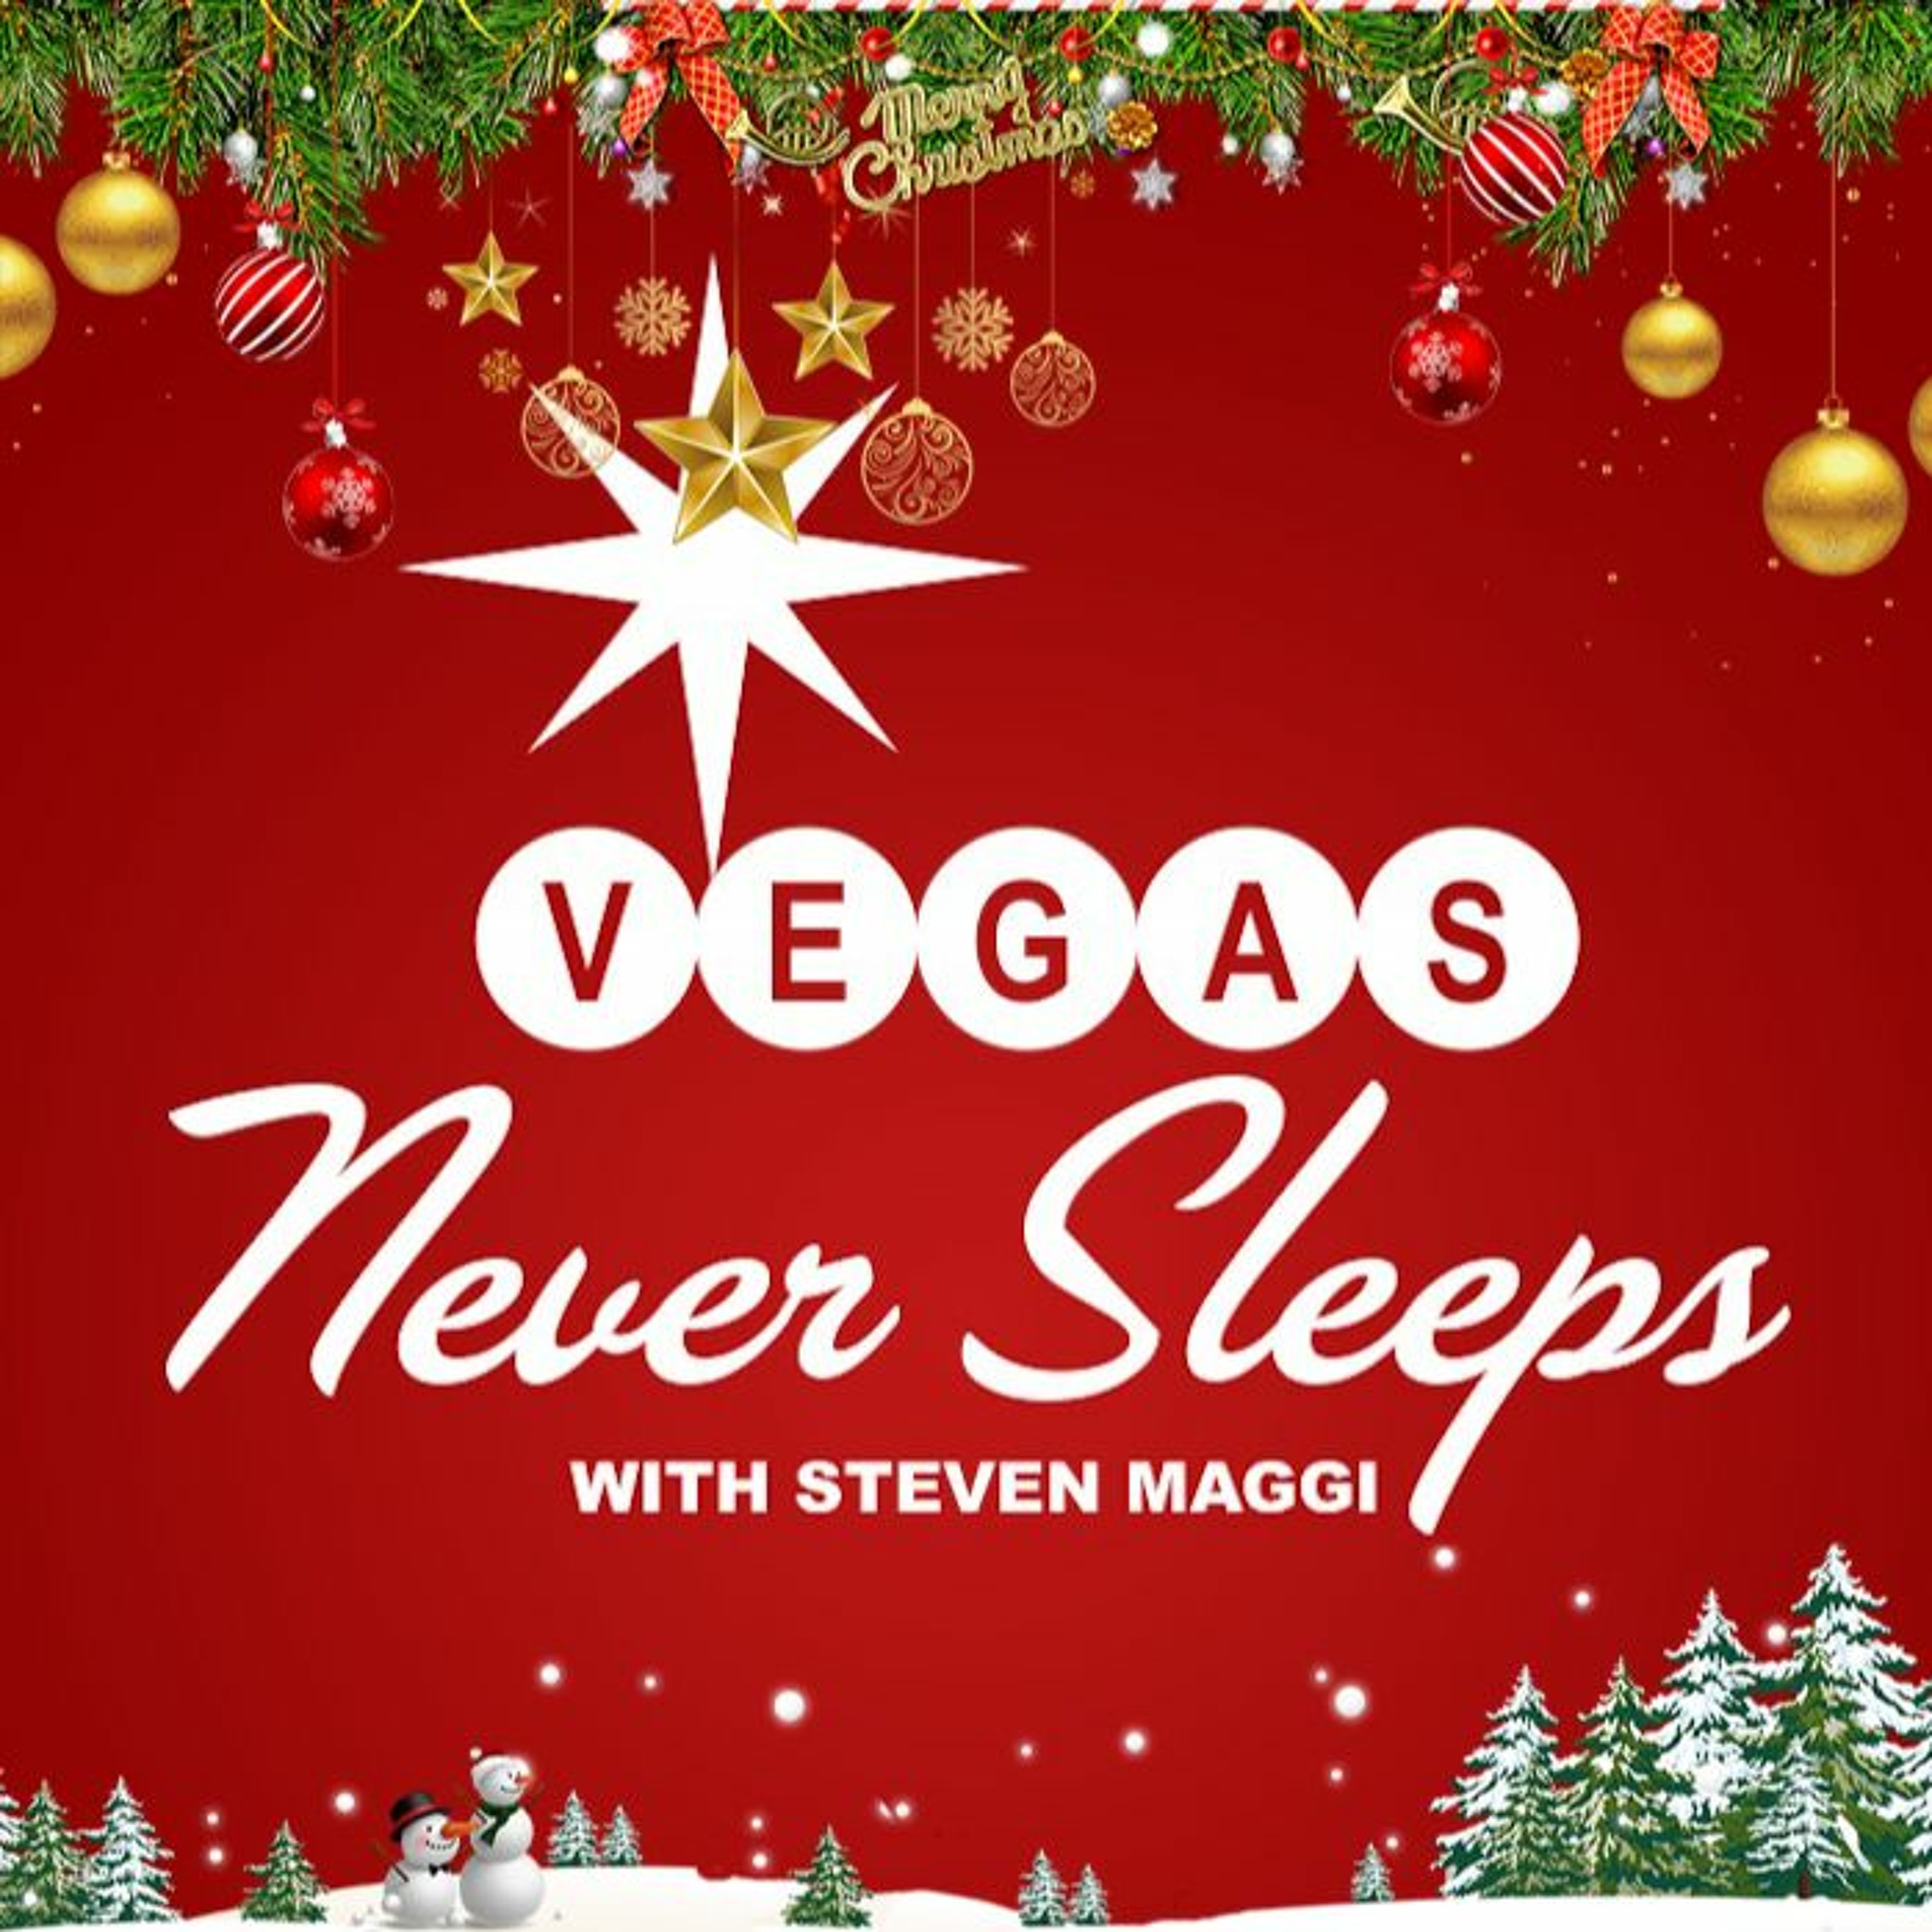 ”Christmas in Las Vegas” - An Unforgettable Holiday Special